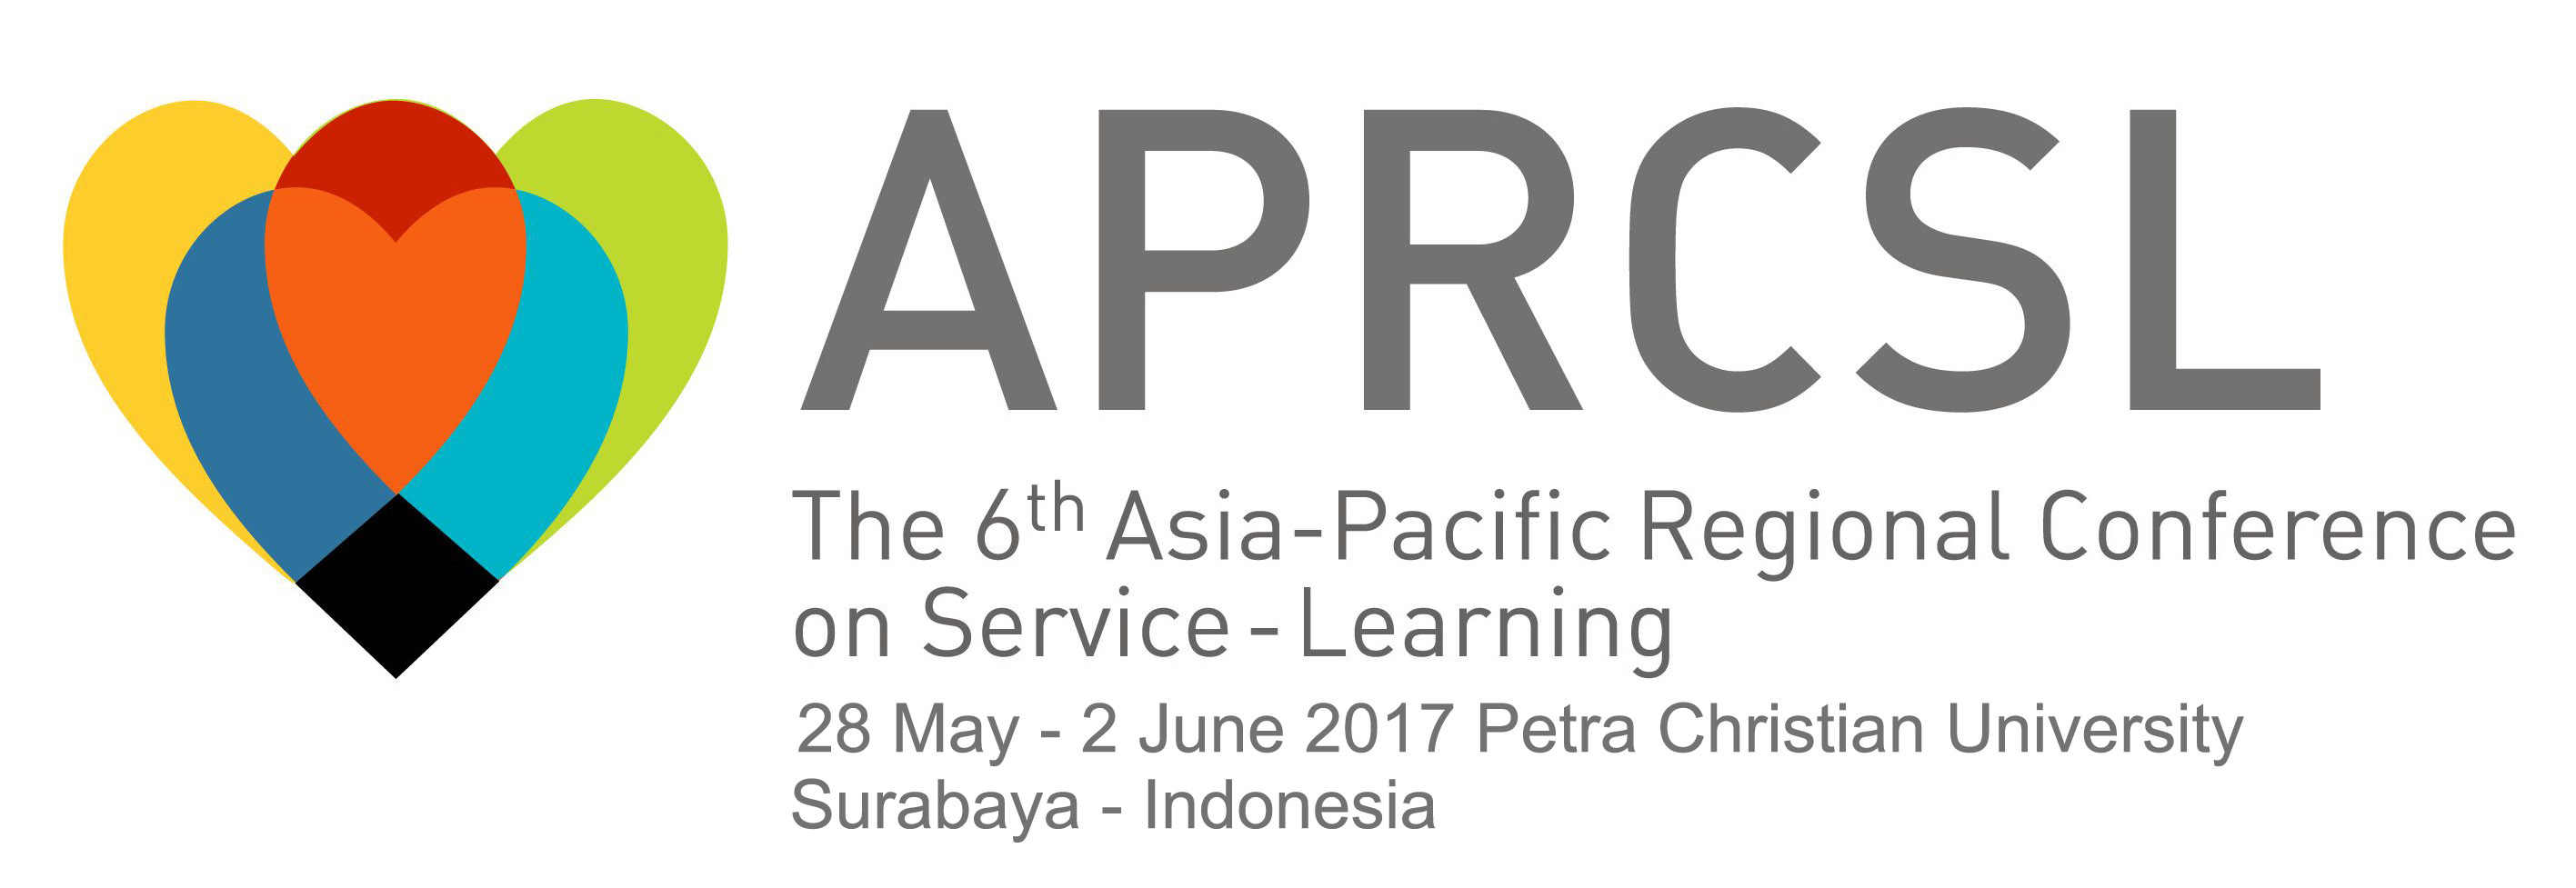 The 6th Asia-Pacific Regional Conference on Service Learning